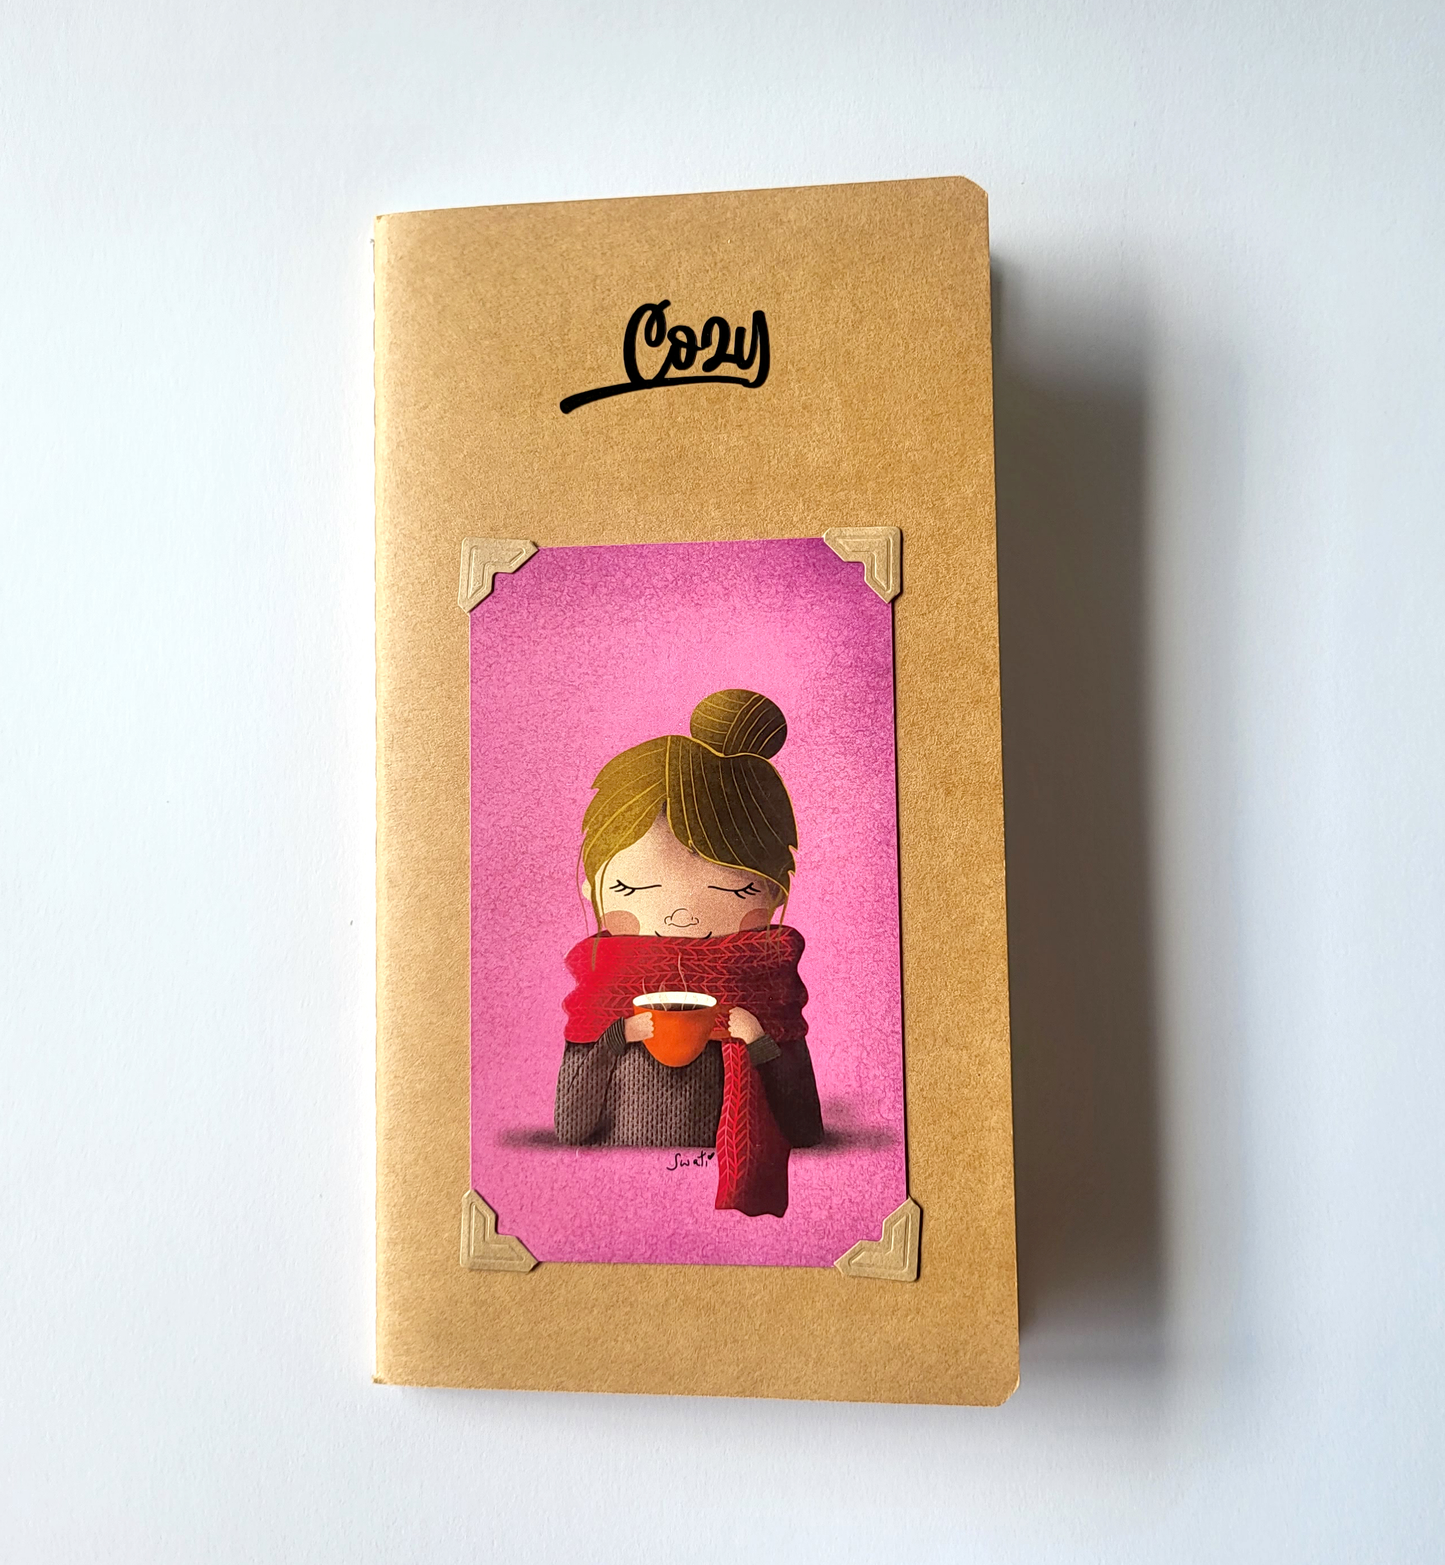 Illustration cover journal | Notebook| Cozy